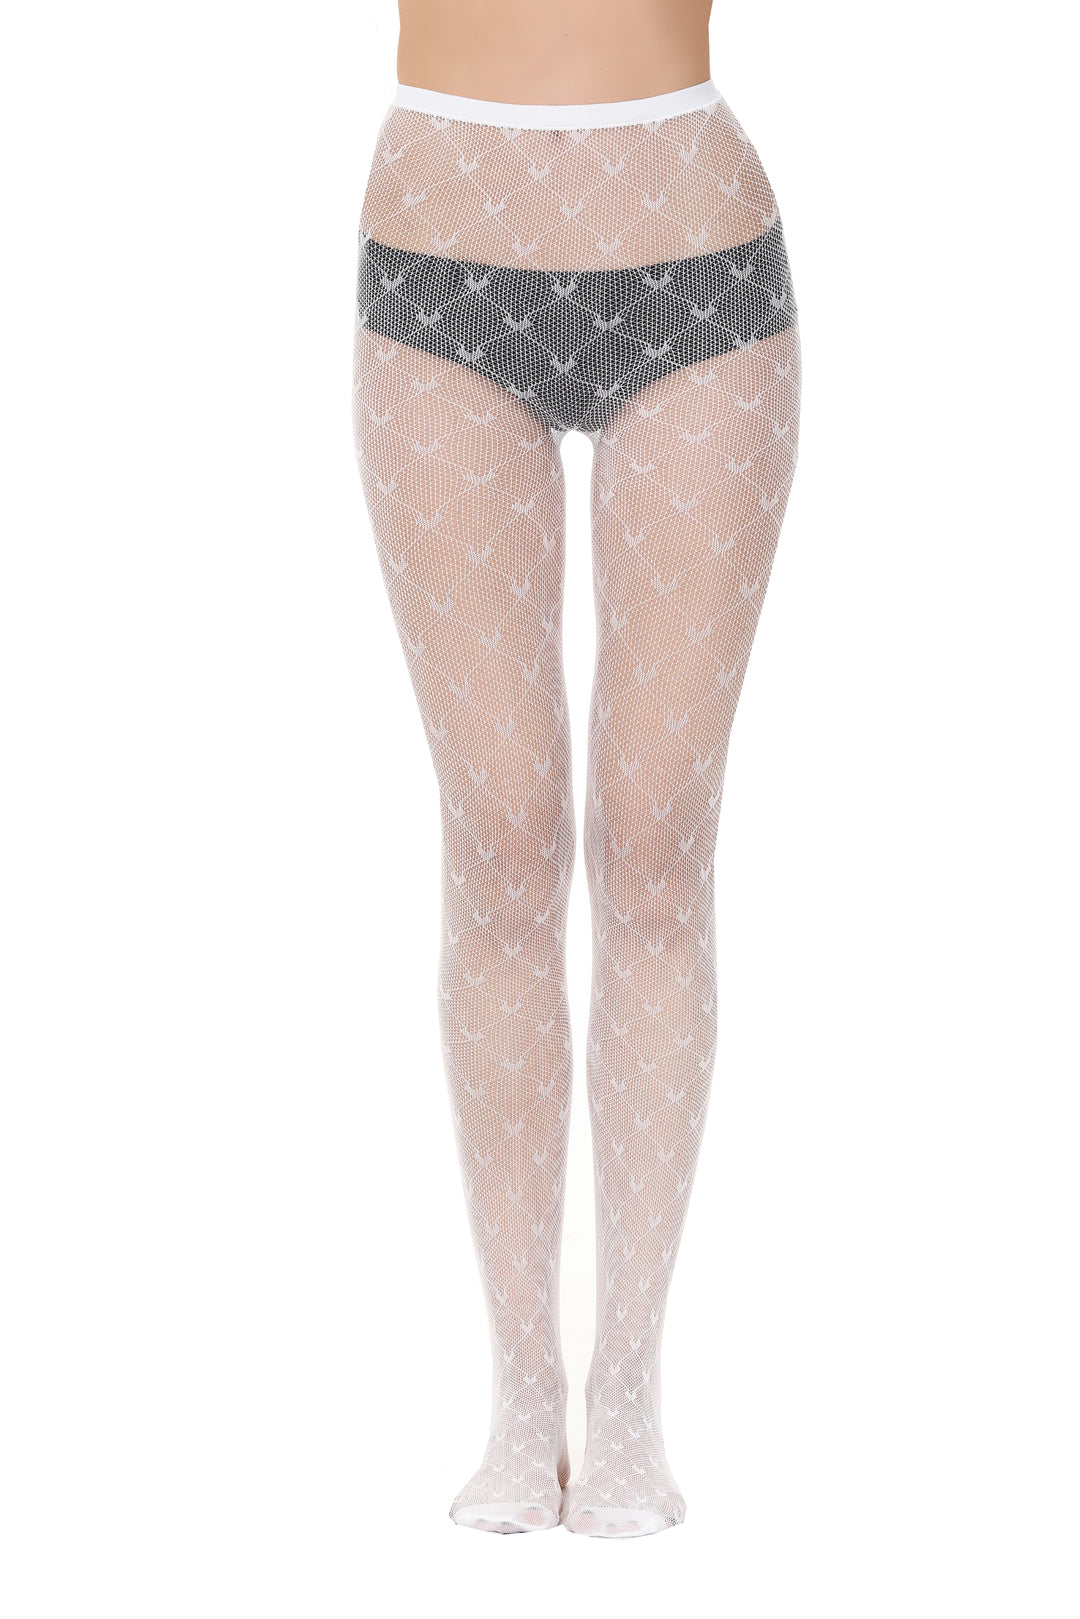 Fishnet Tights 111439-White Front